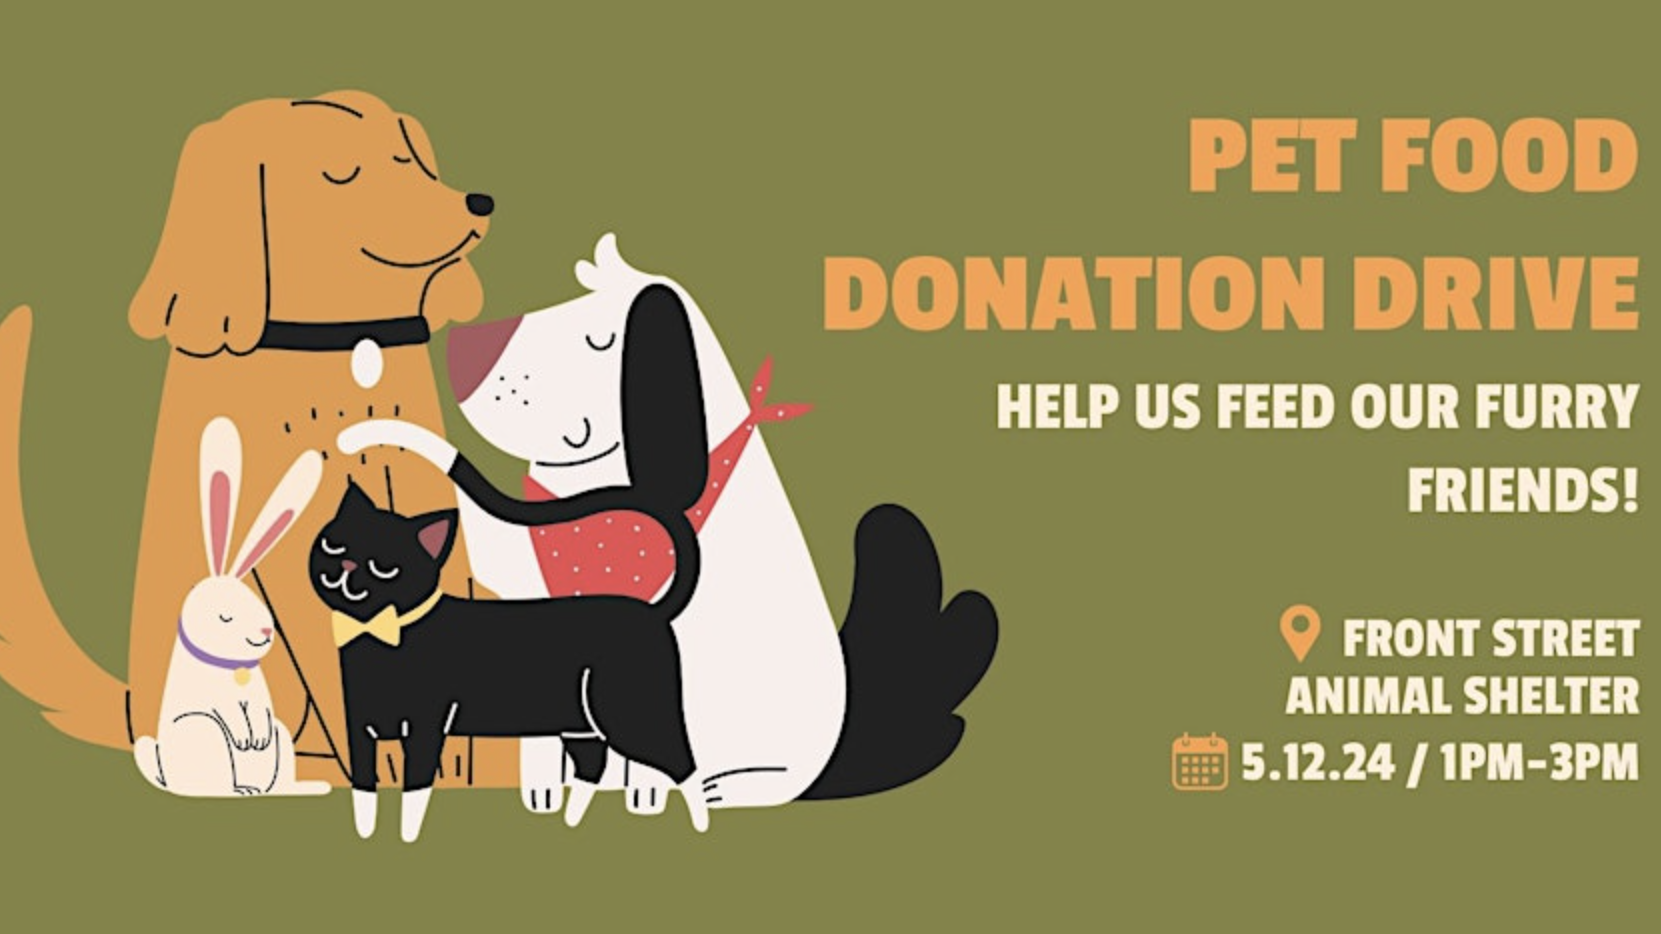 An engaging illustration promotes a pet food donation drive, depicting diverse, charming animals - a tall dog, an elegant cat wearing a chic scarf, a cuddly rabbit and a vibrant bird - in an upcoming event at Front Street Animal Shelter. Their affectionate embrace underlines the urgent need for generous contributions to provide meals to these beloved furry friends. The accompanying text beckons animal lovers to act and their vital support.